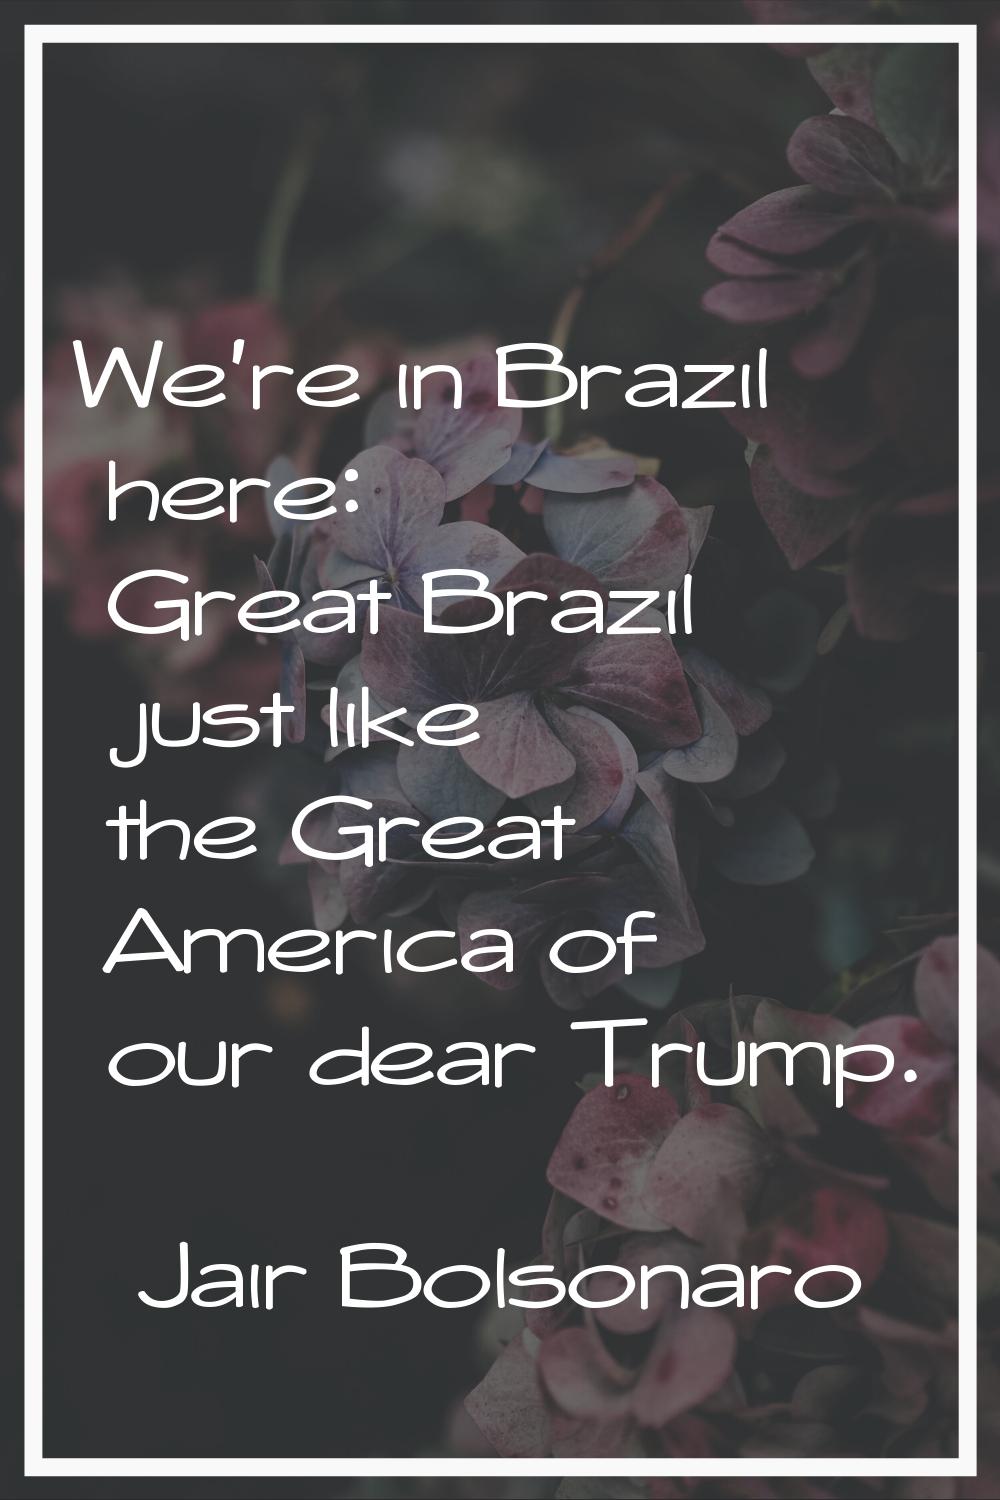 We're in Brazil here: Great Brazil just like the Great America of our dear Trump.